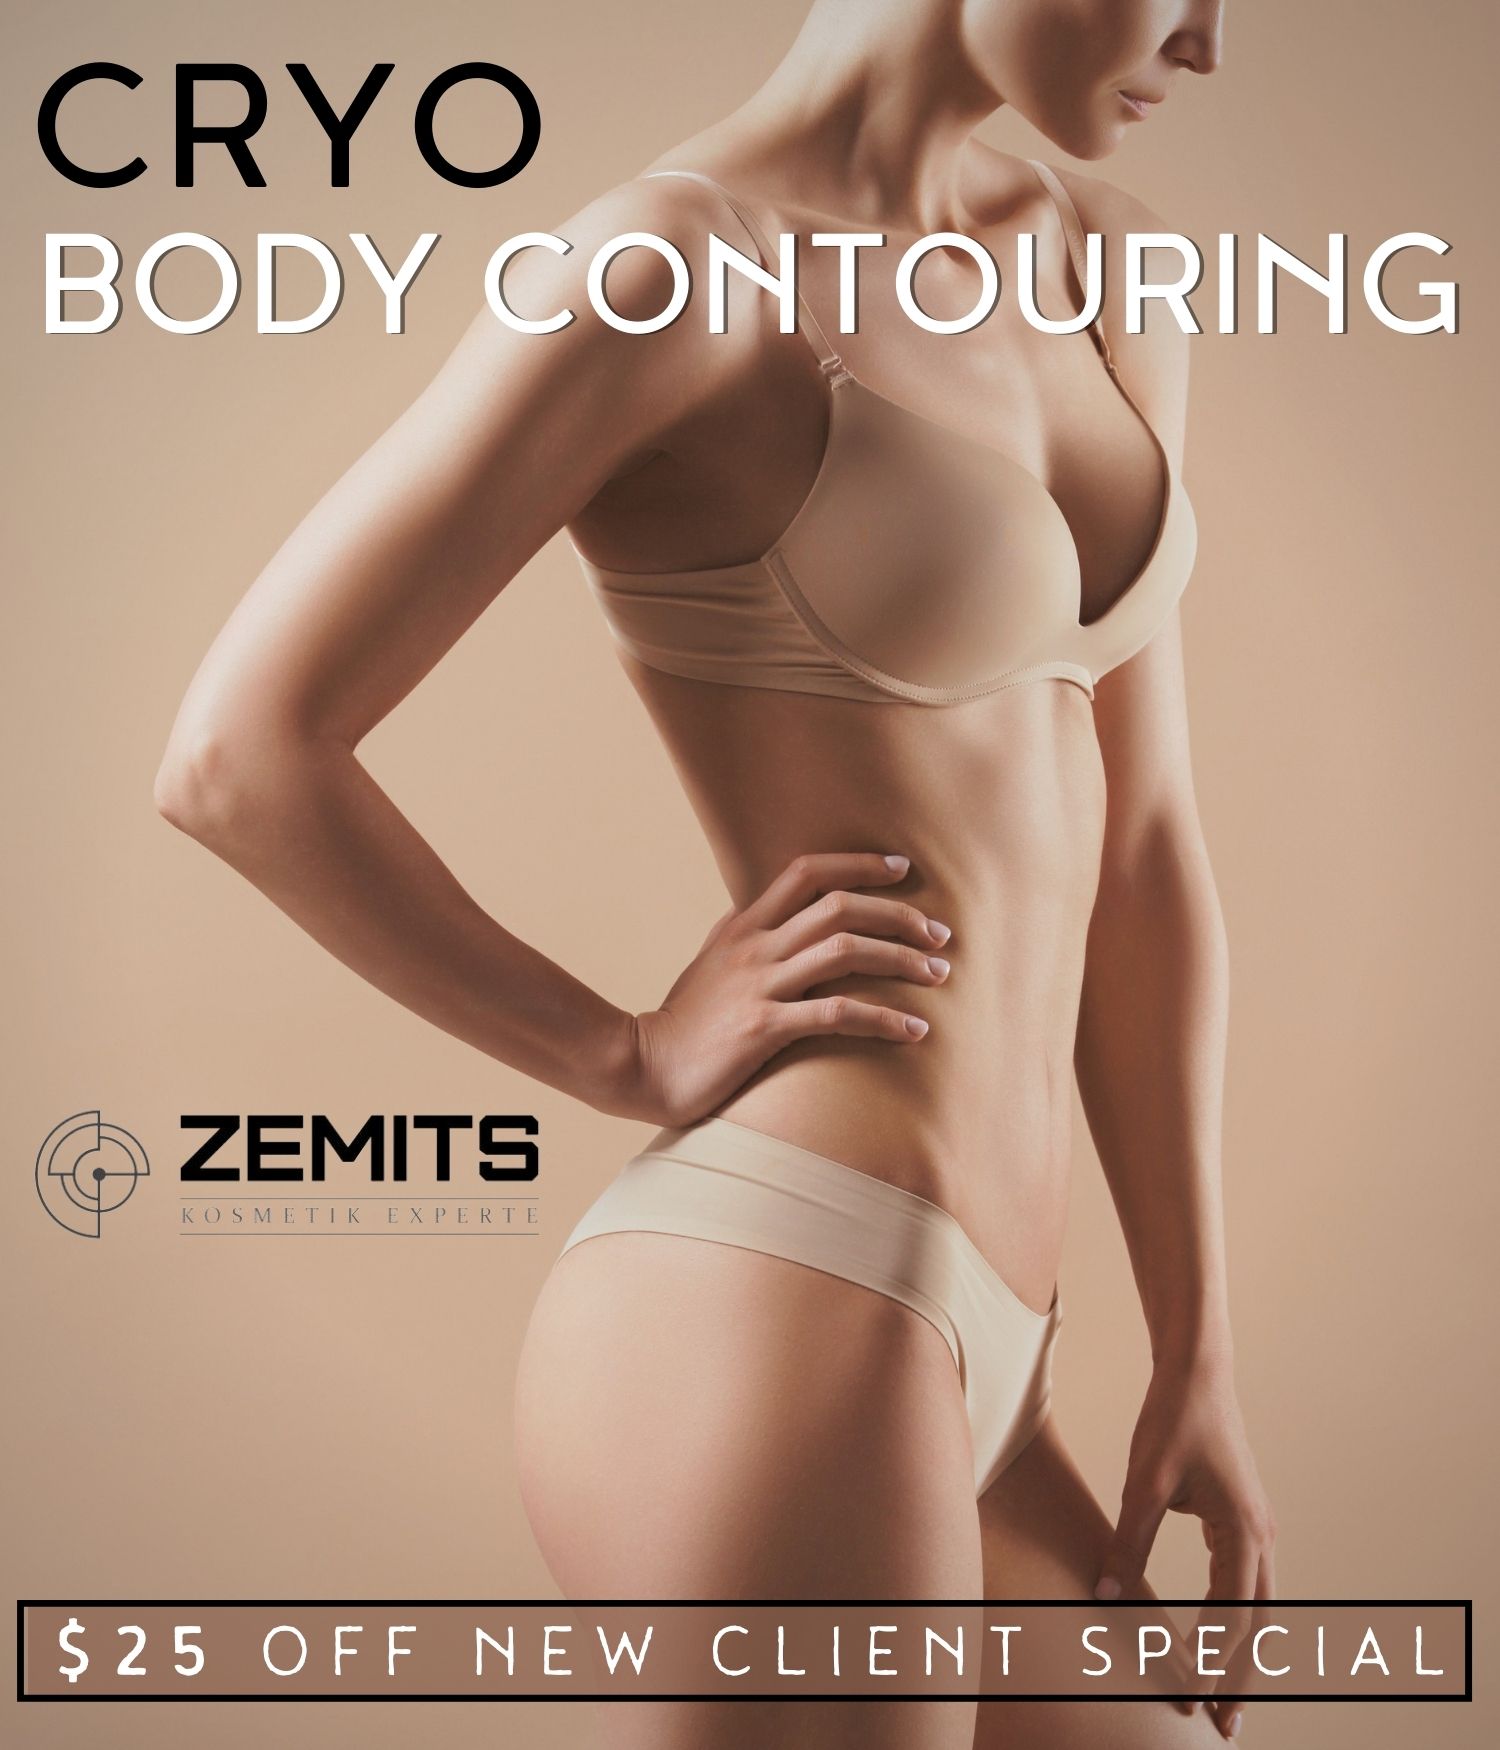 a woman with a perfect body promoting cryo body contouring